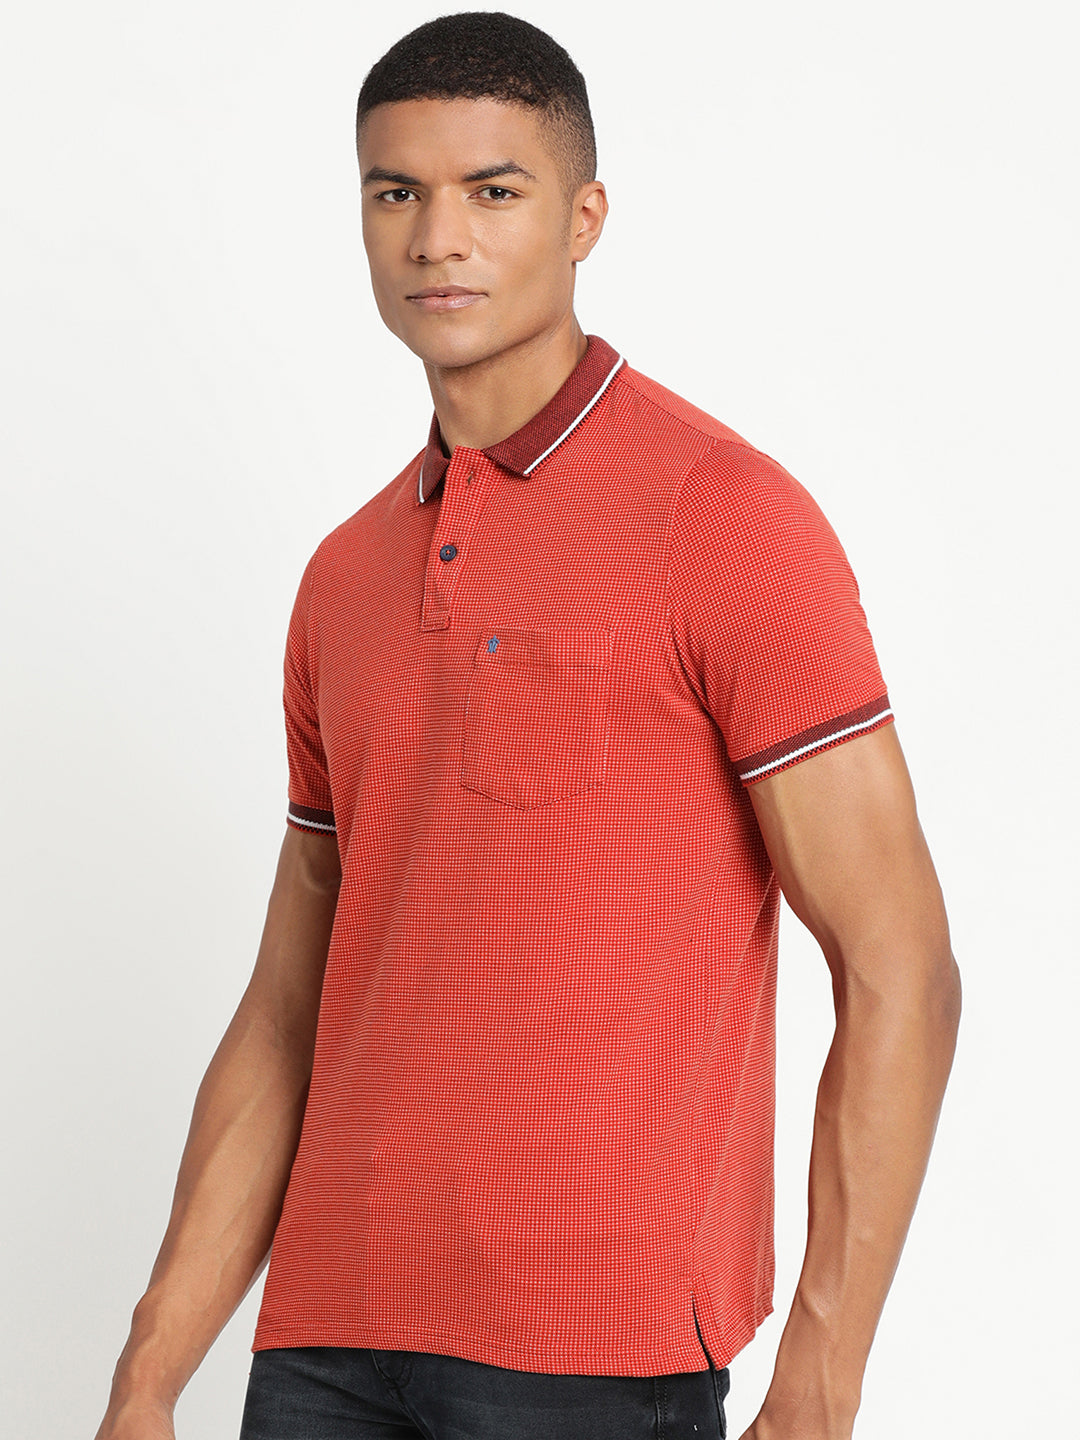 Red Self Design Polo Neck T-Shirt